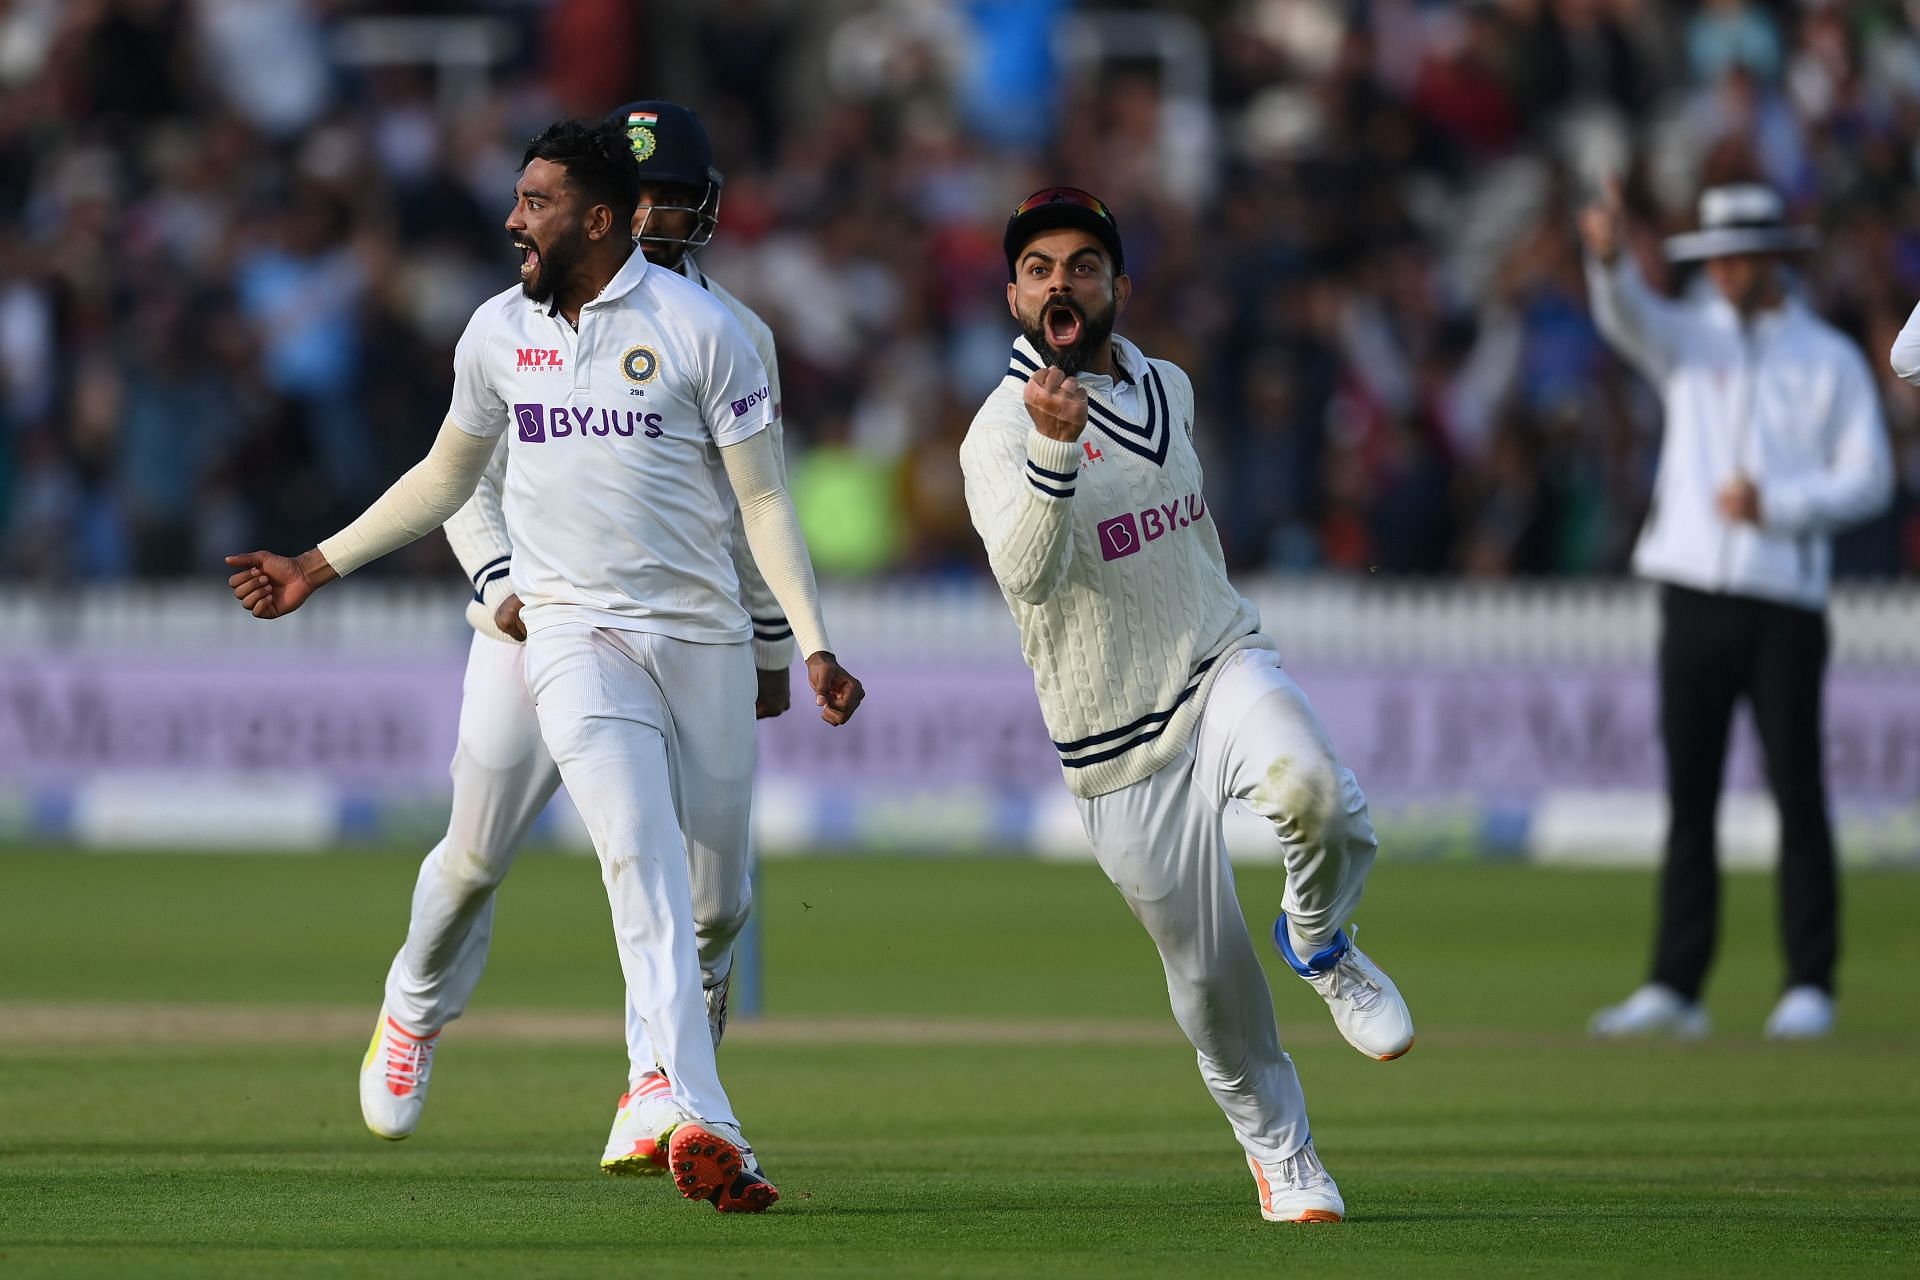 Aakash Chopra highlighted that Mohammed Siraj has bowled some excellent spells